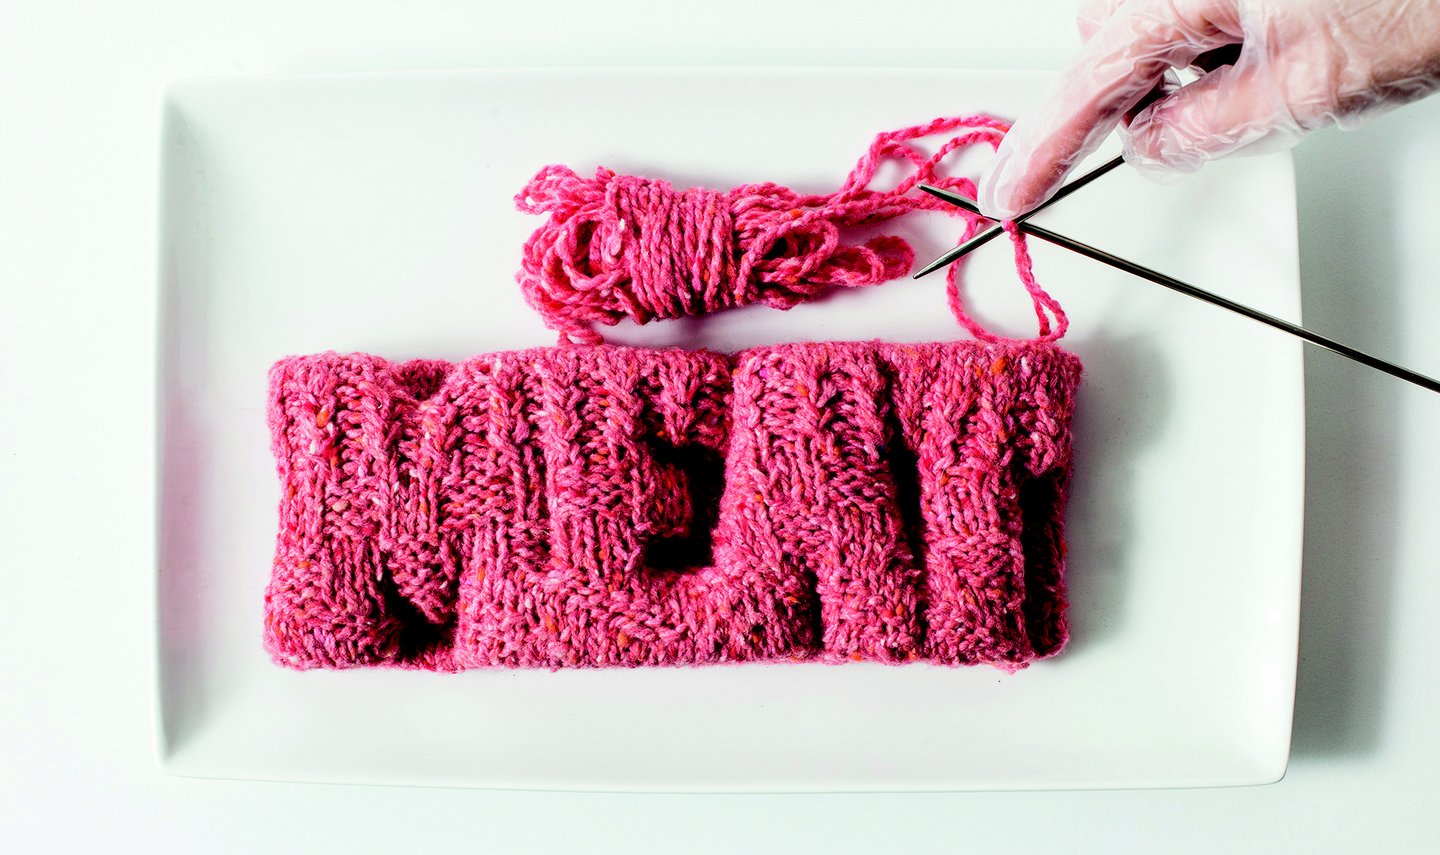 Next Nature Network - Knitted Meat.jpg